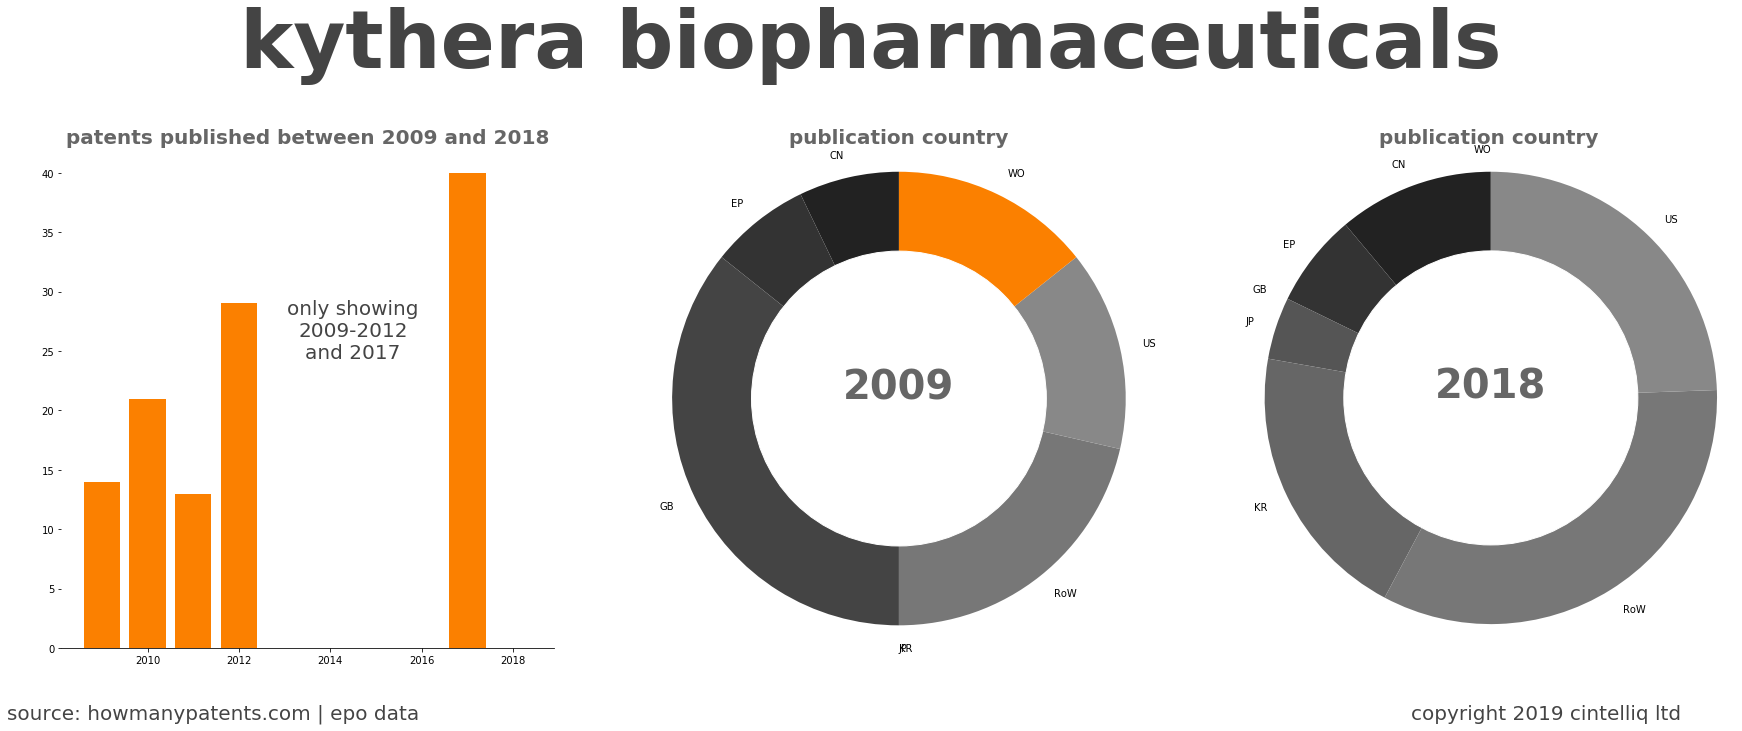 summary of patents for Kythera Biopharmaceuticals